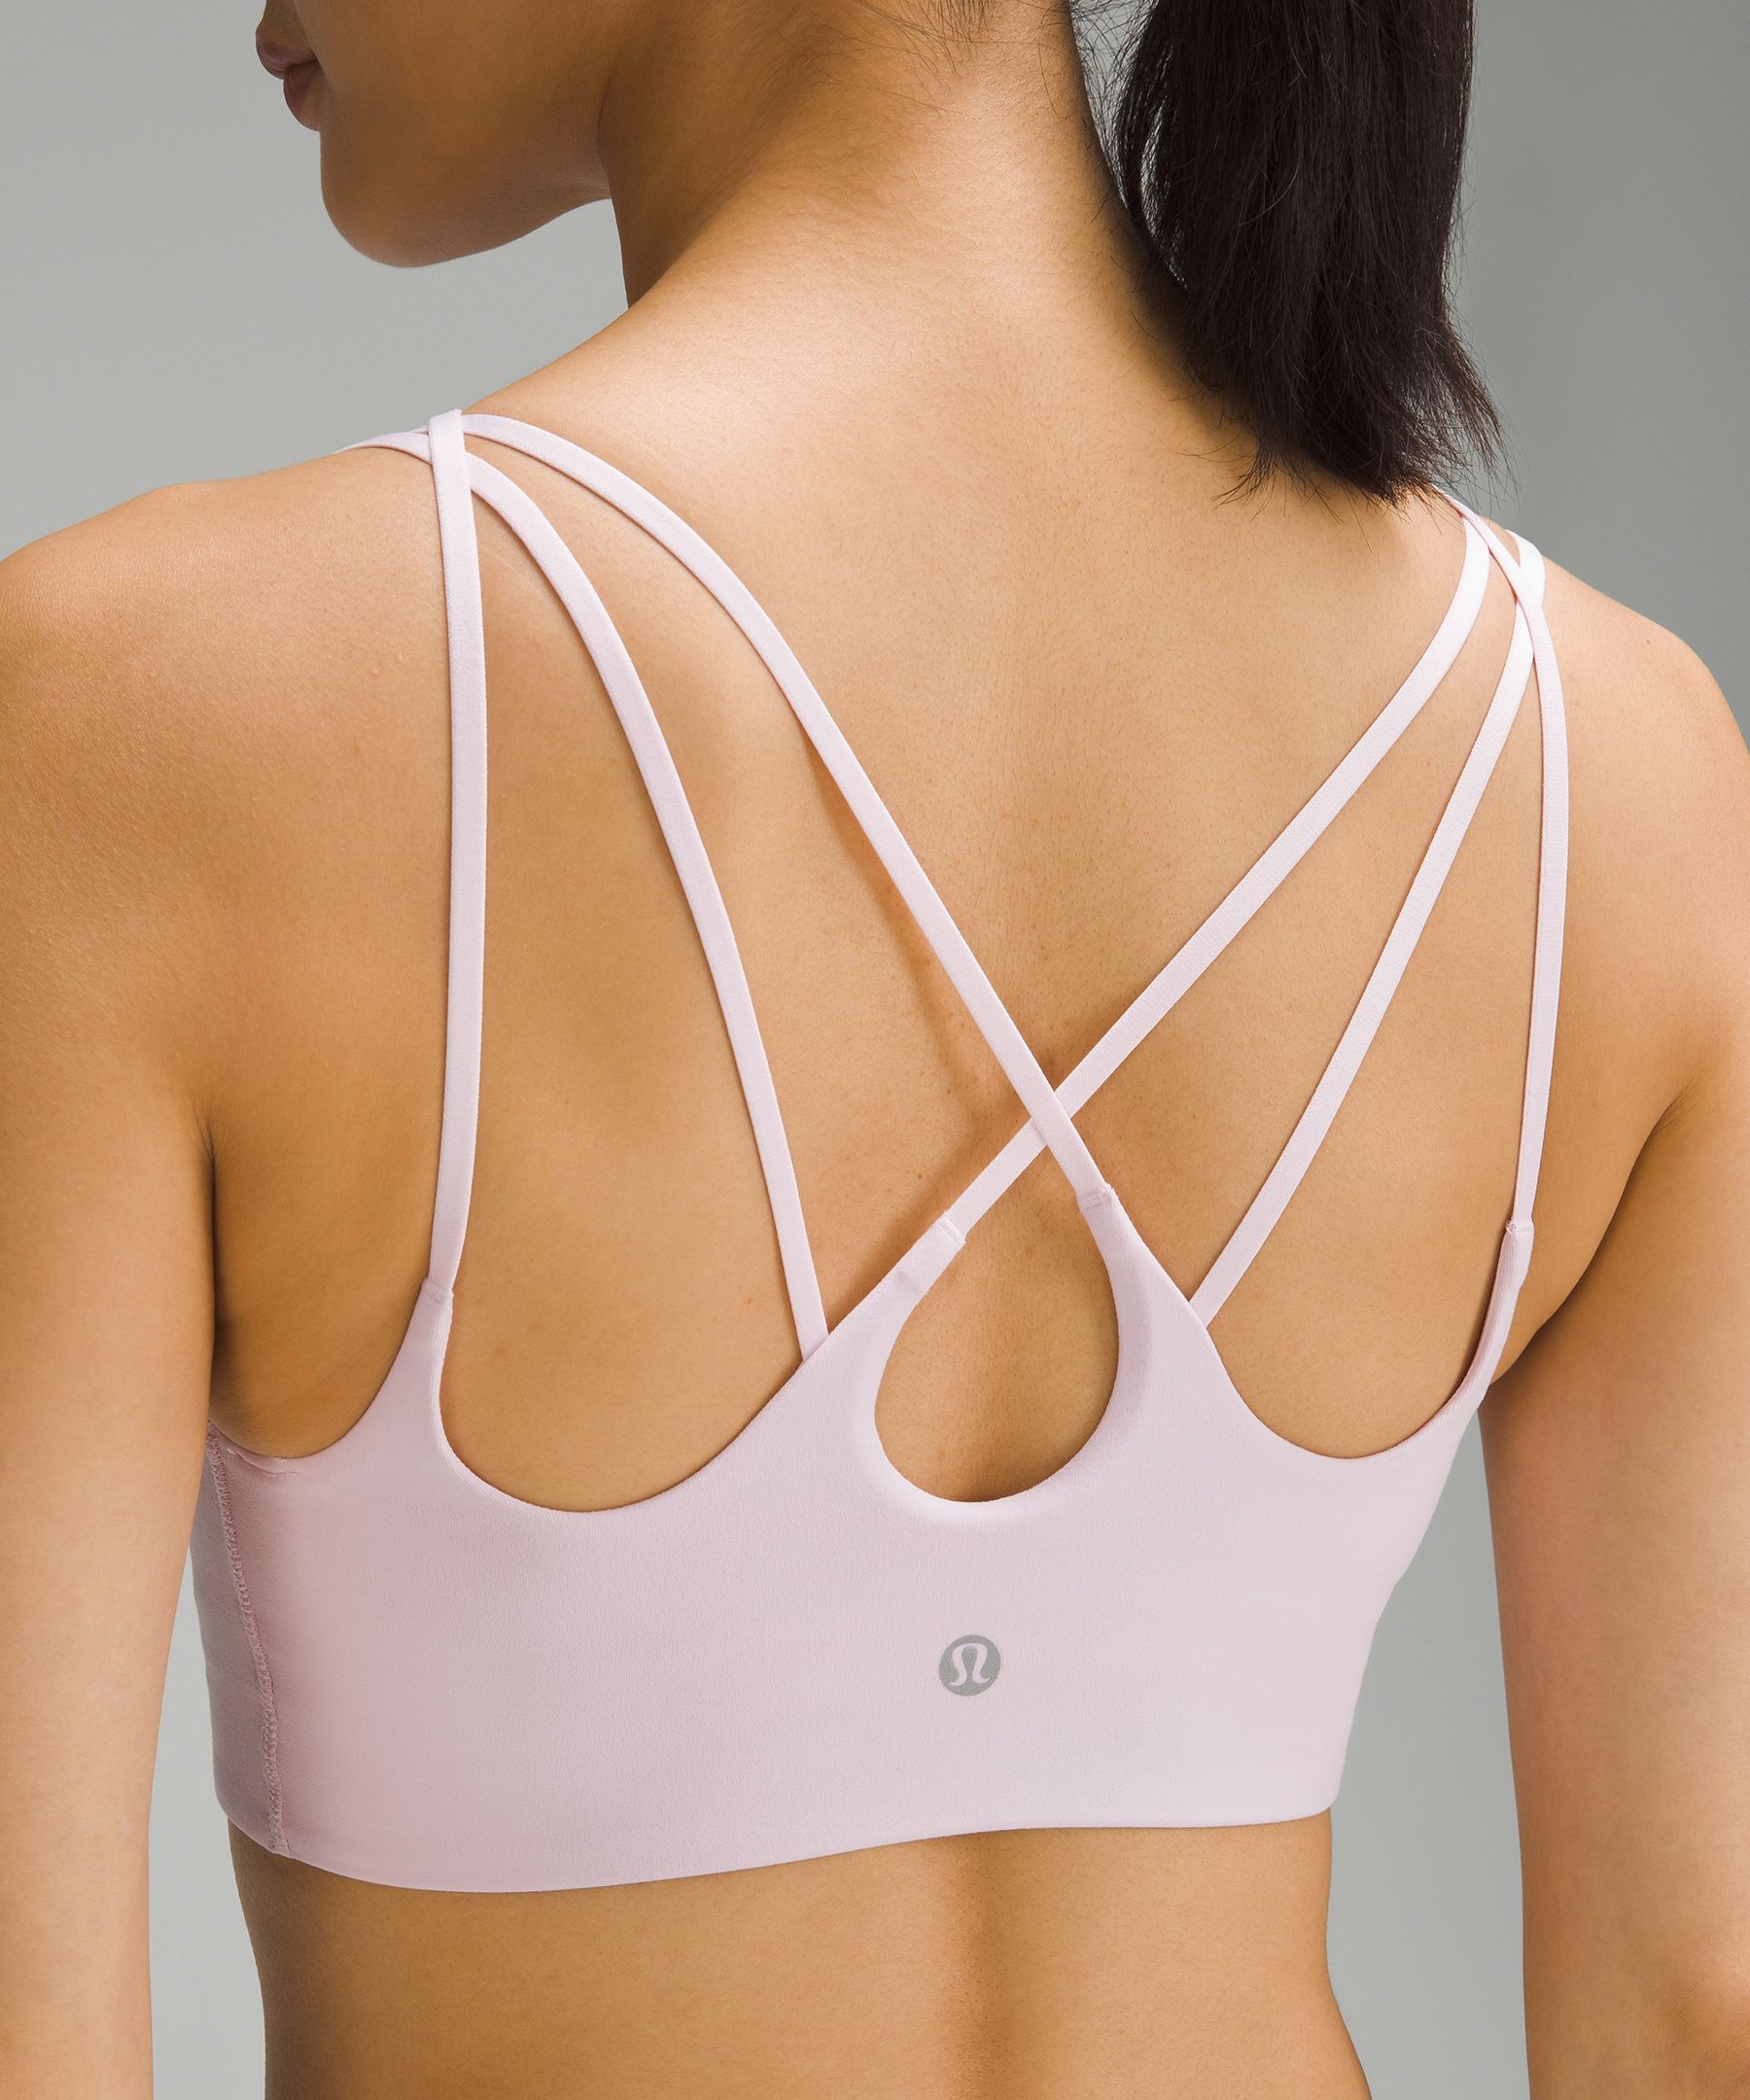 Lululemon Introduces Lightweight Bra for Day and Night